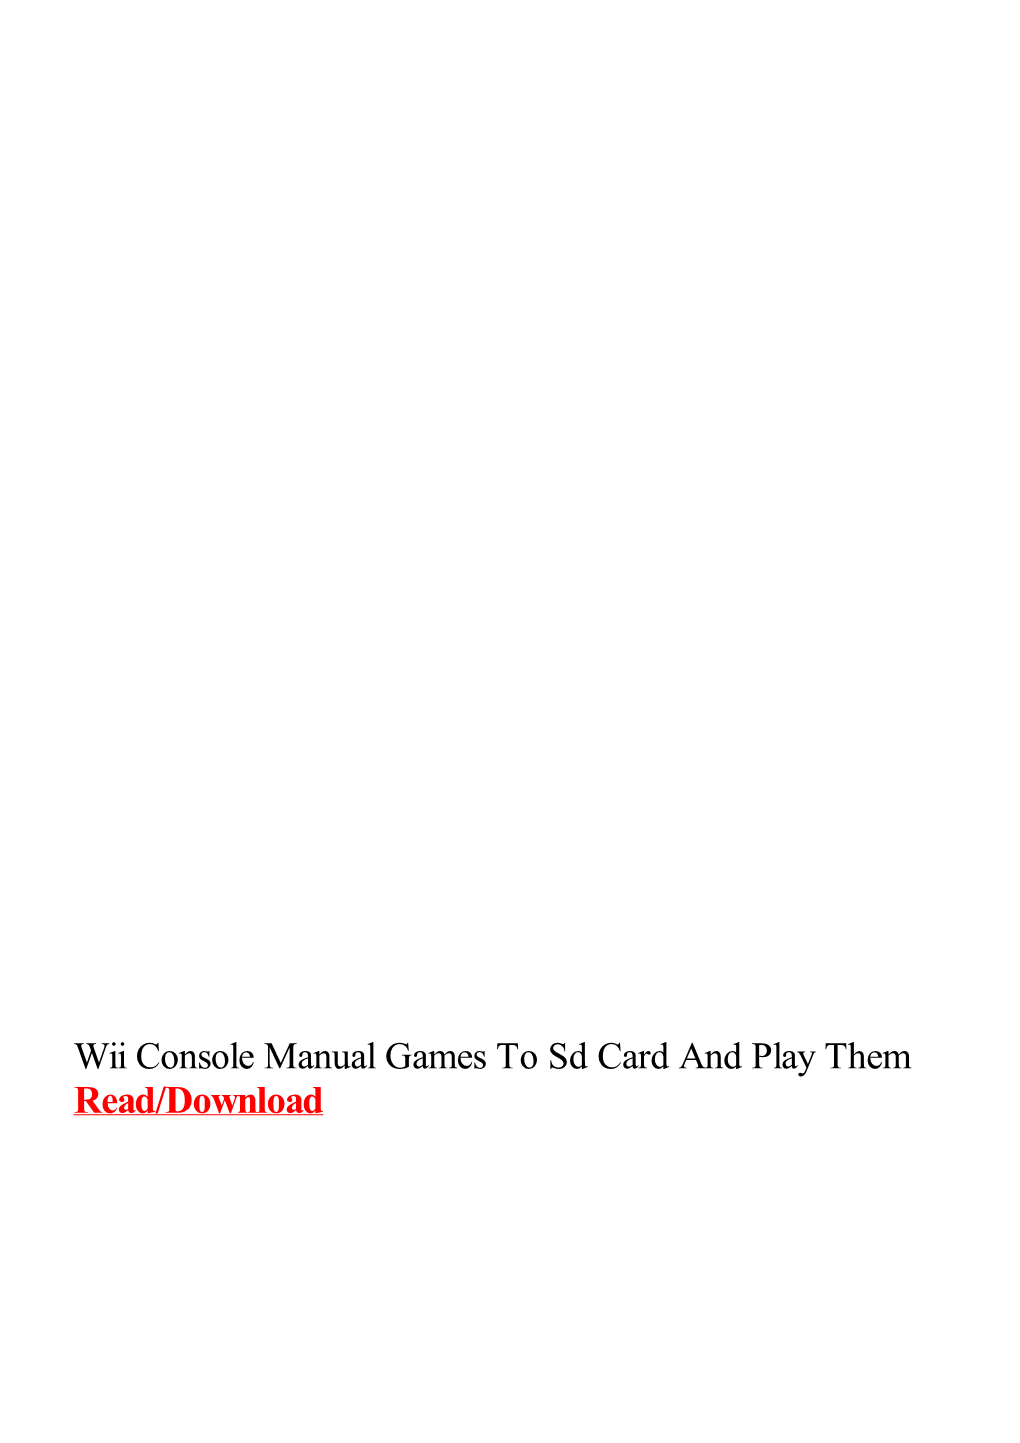 Wii Console Manual Games to Sd Card and Play Them